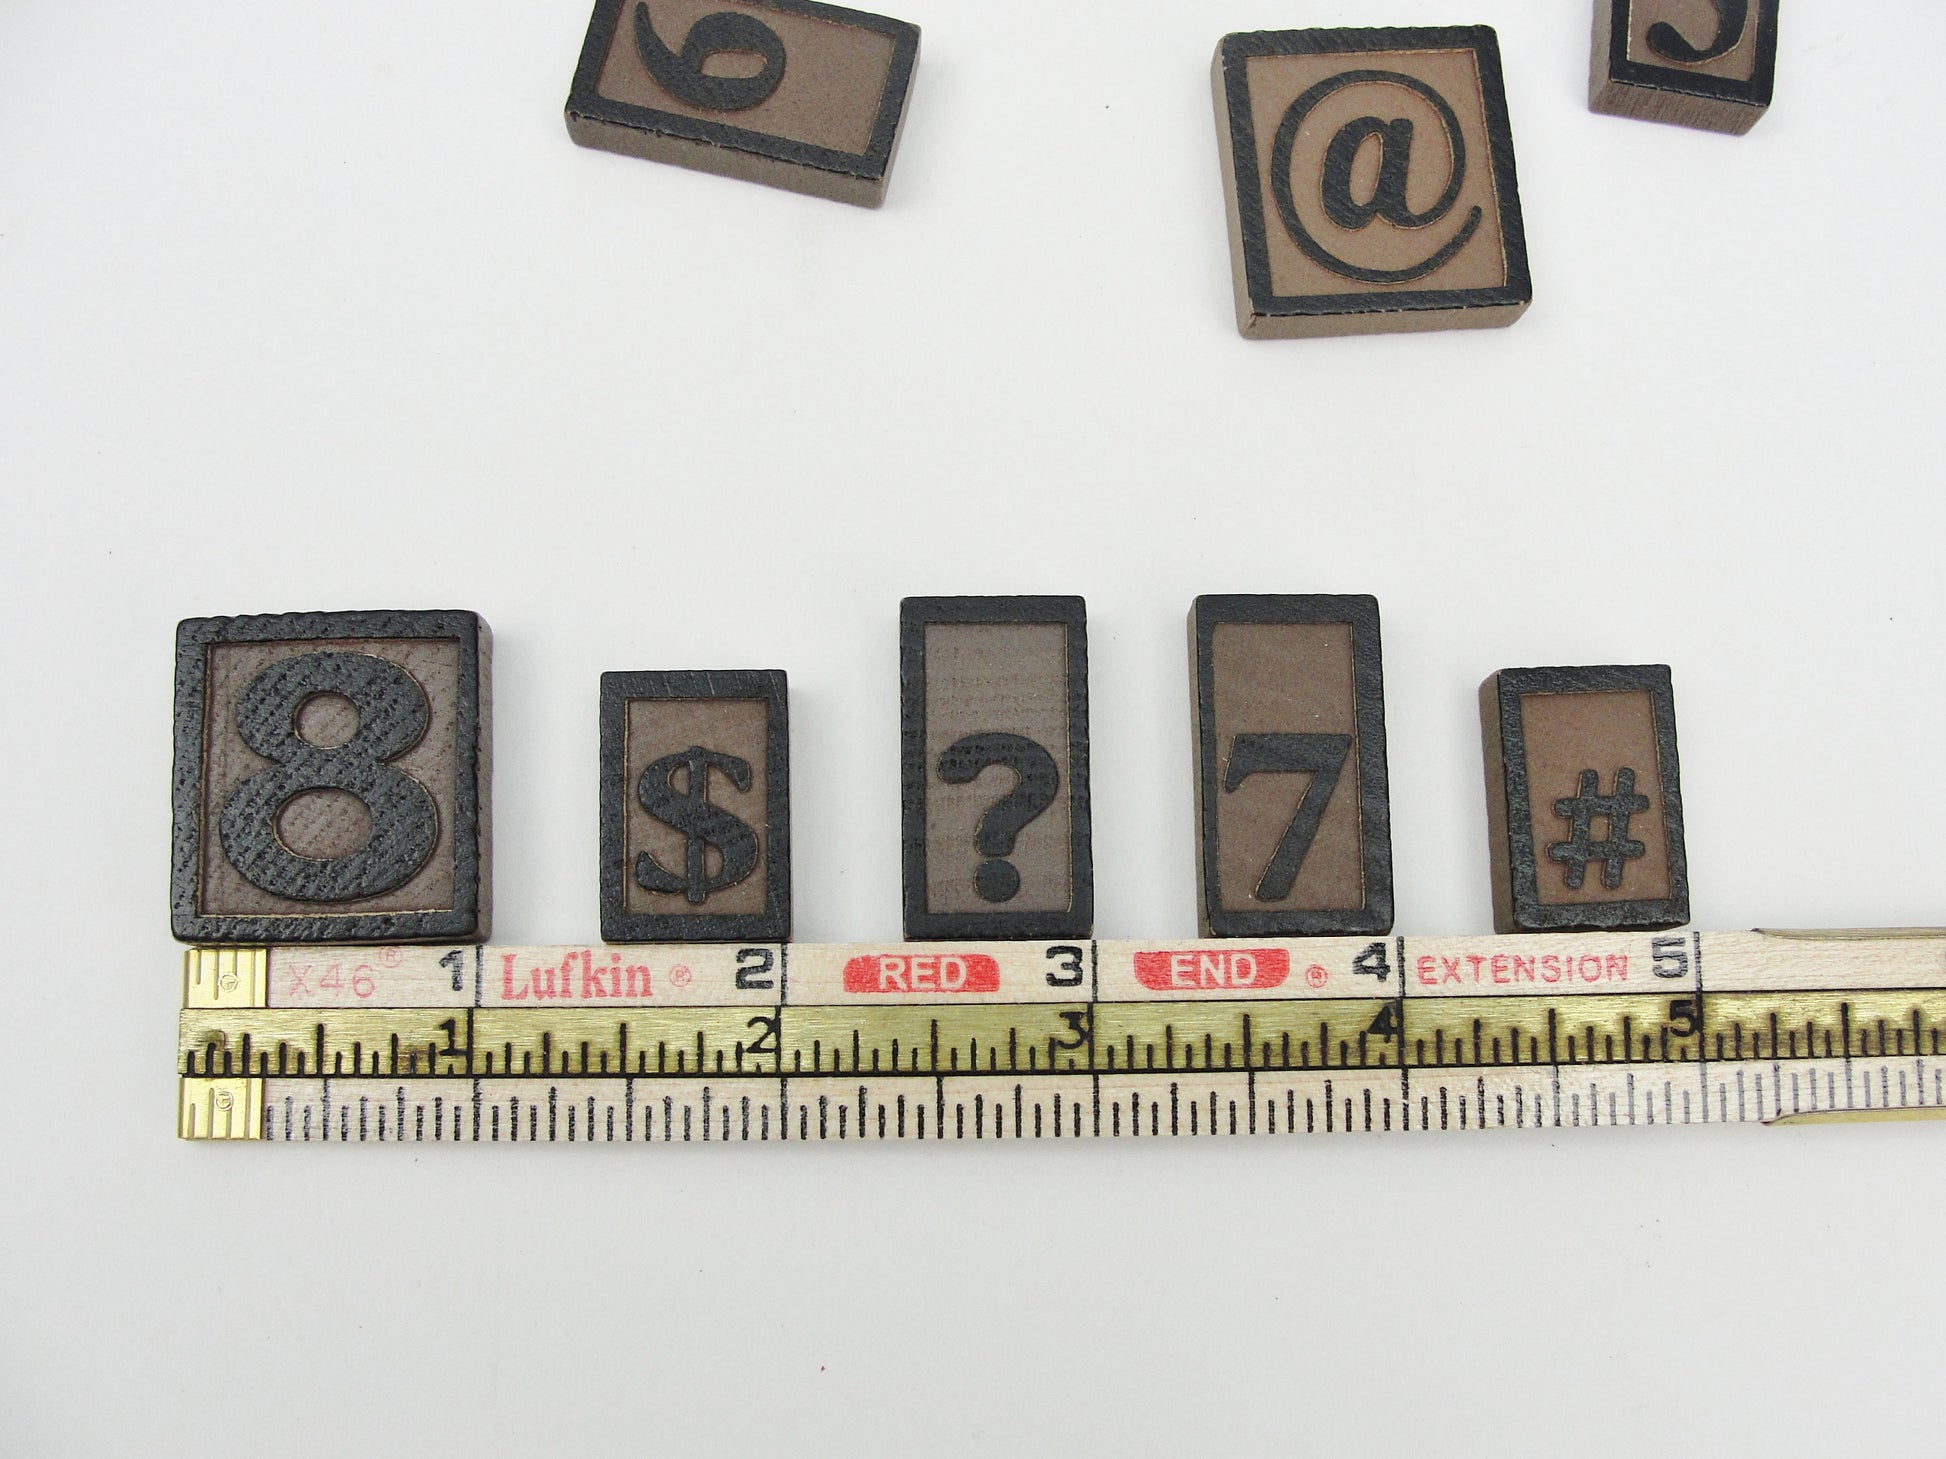 Wooden letterpress number and symbol tiles - Mixed Media Art Supplies - Craft Supply House